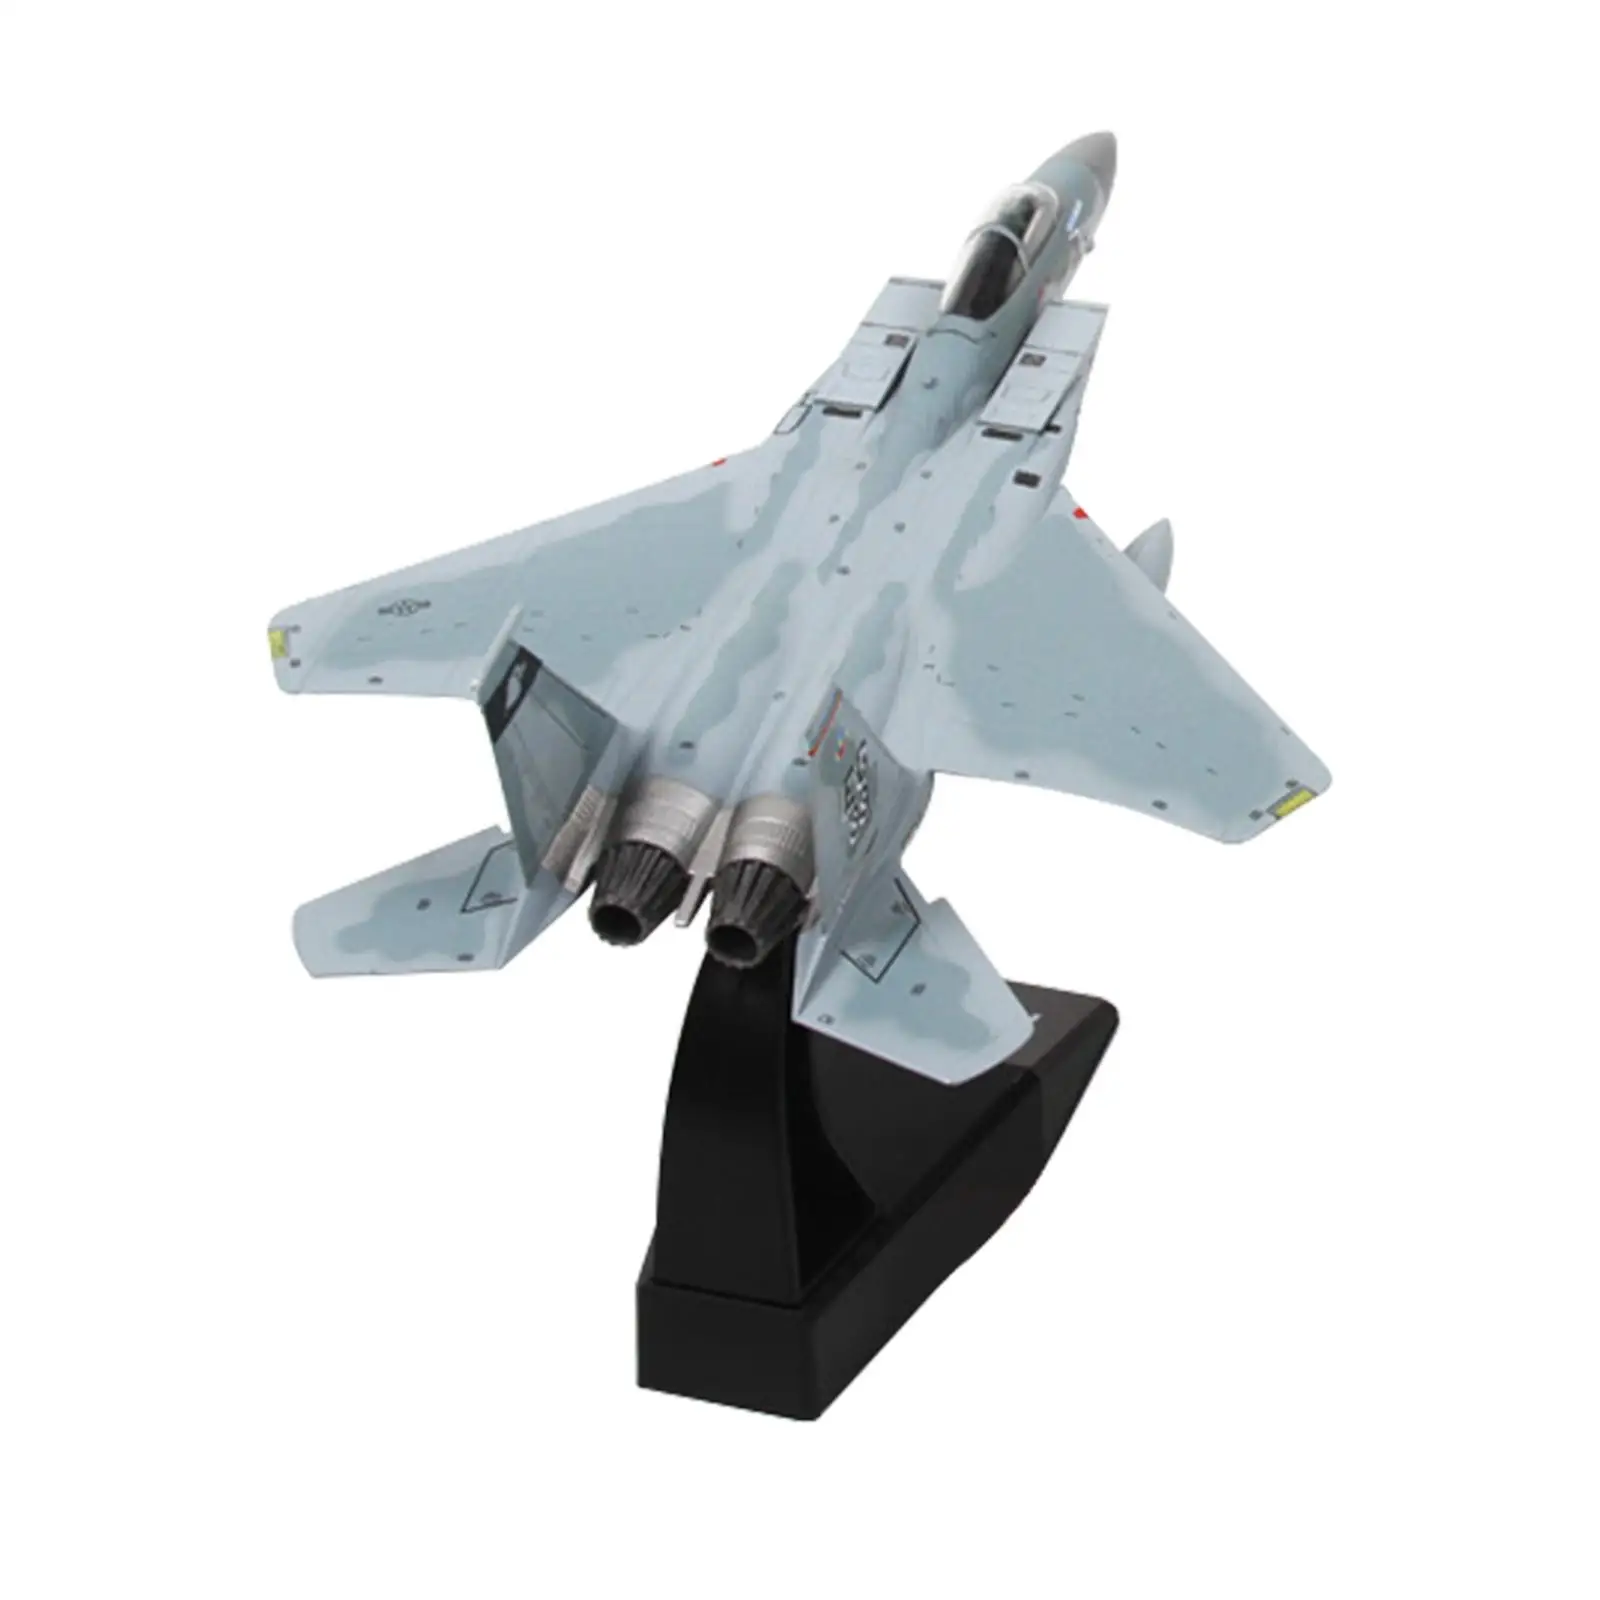 1/100 Scale Plane Collection Zinc Alloy Toy Decorative Gifts for Adult Kids